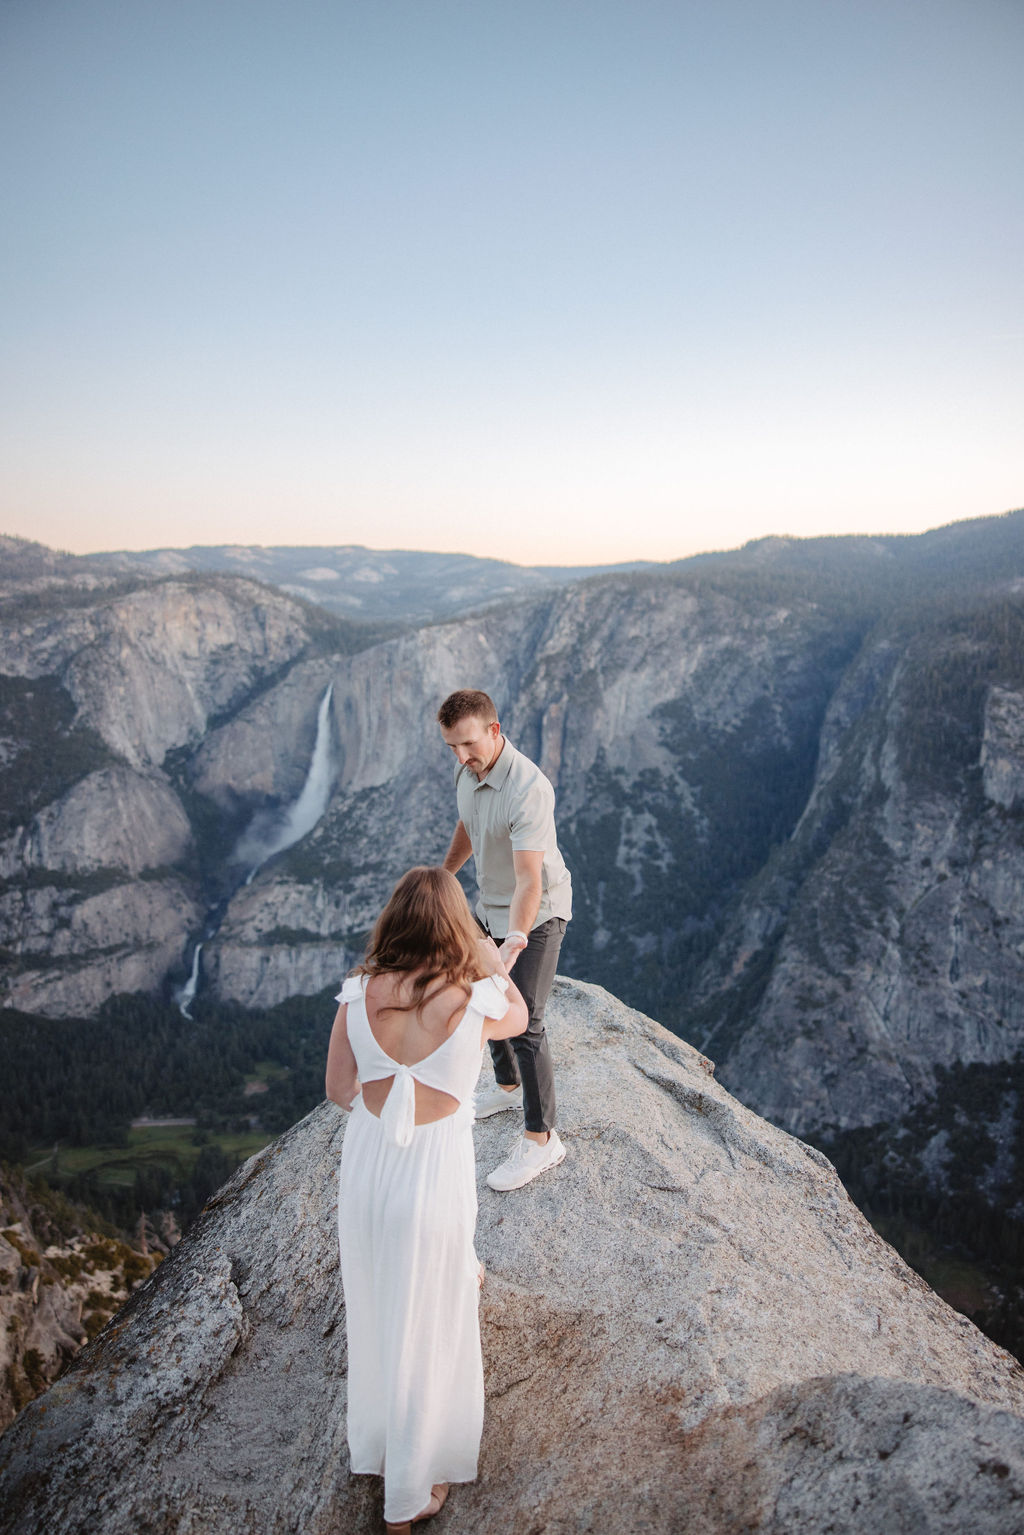 A couple stands on a rocky ledge overlooking a forested mountainous landscape, with the man embracing the woman from behind.